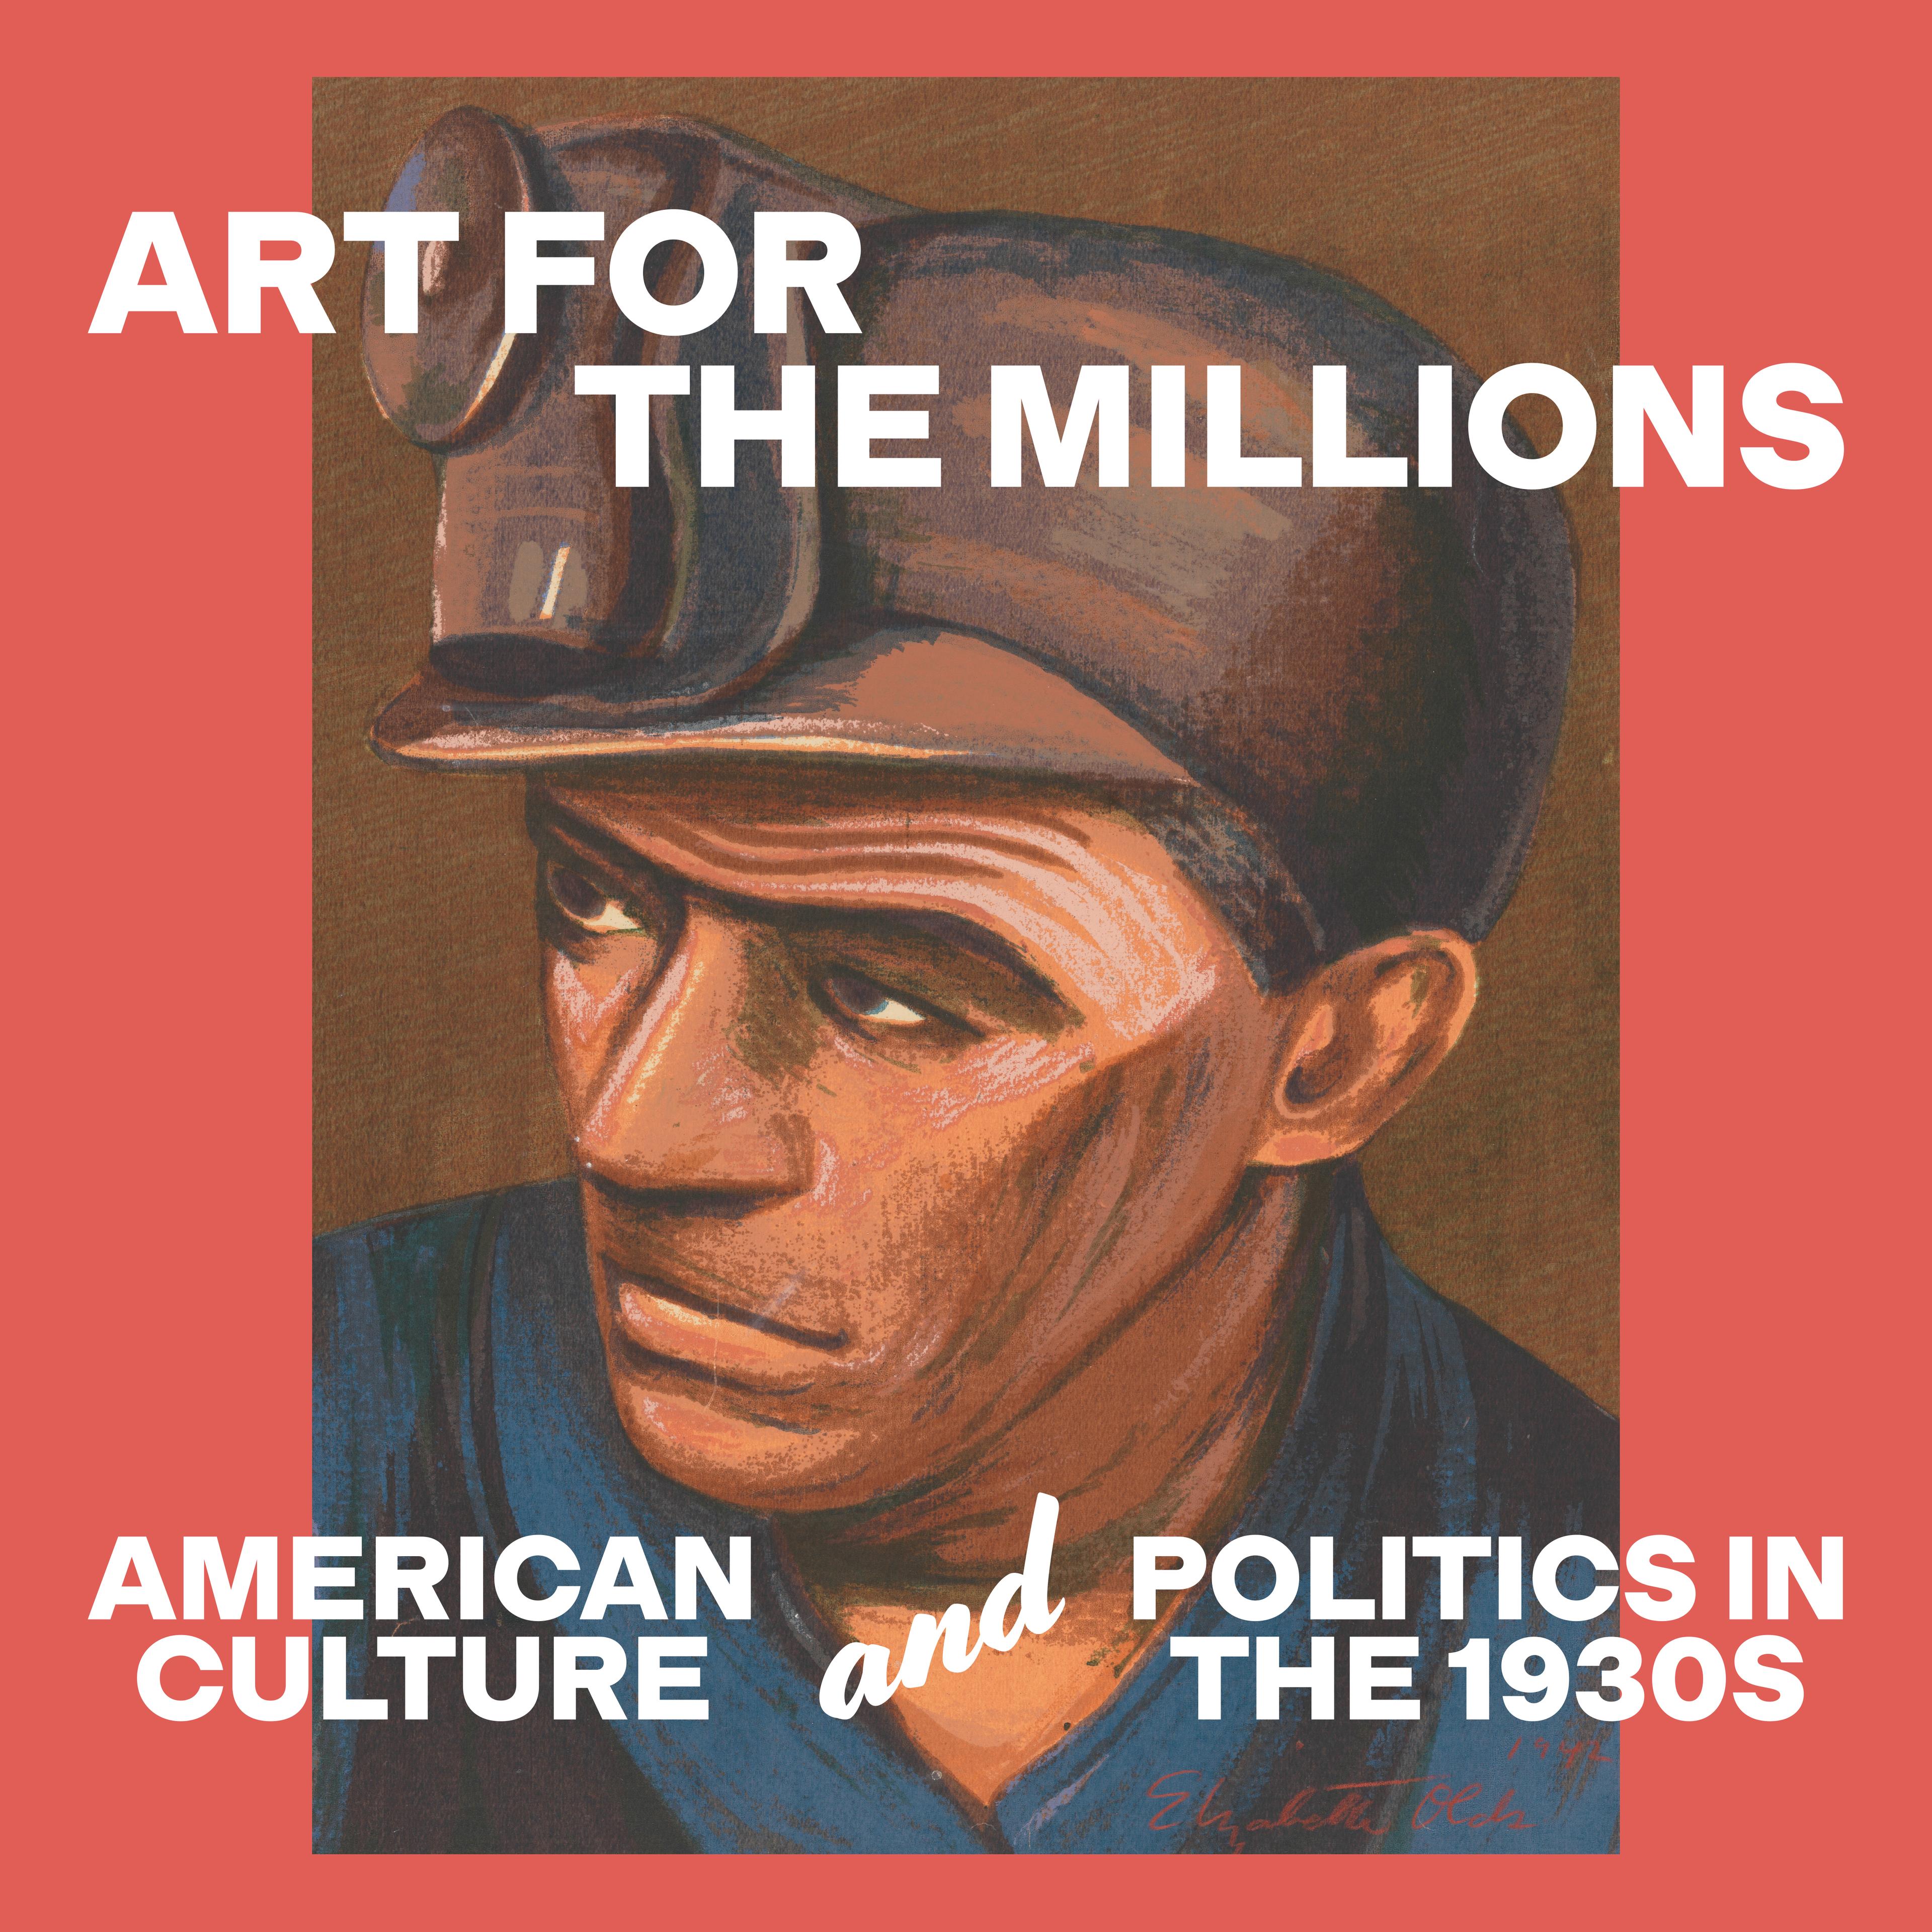 Art for the Millions: American Culture and Politics in the 1930s